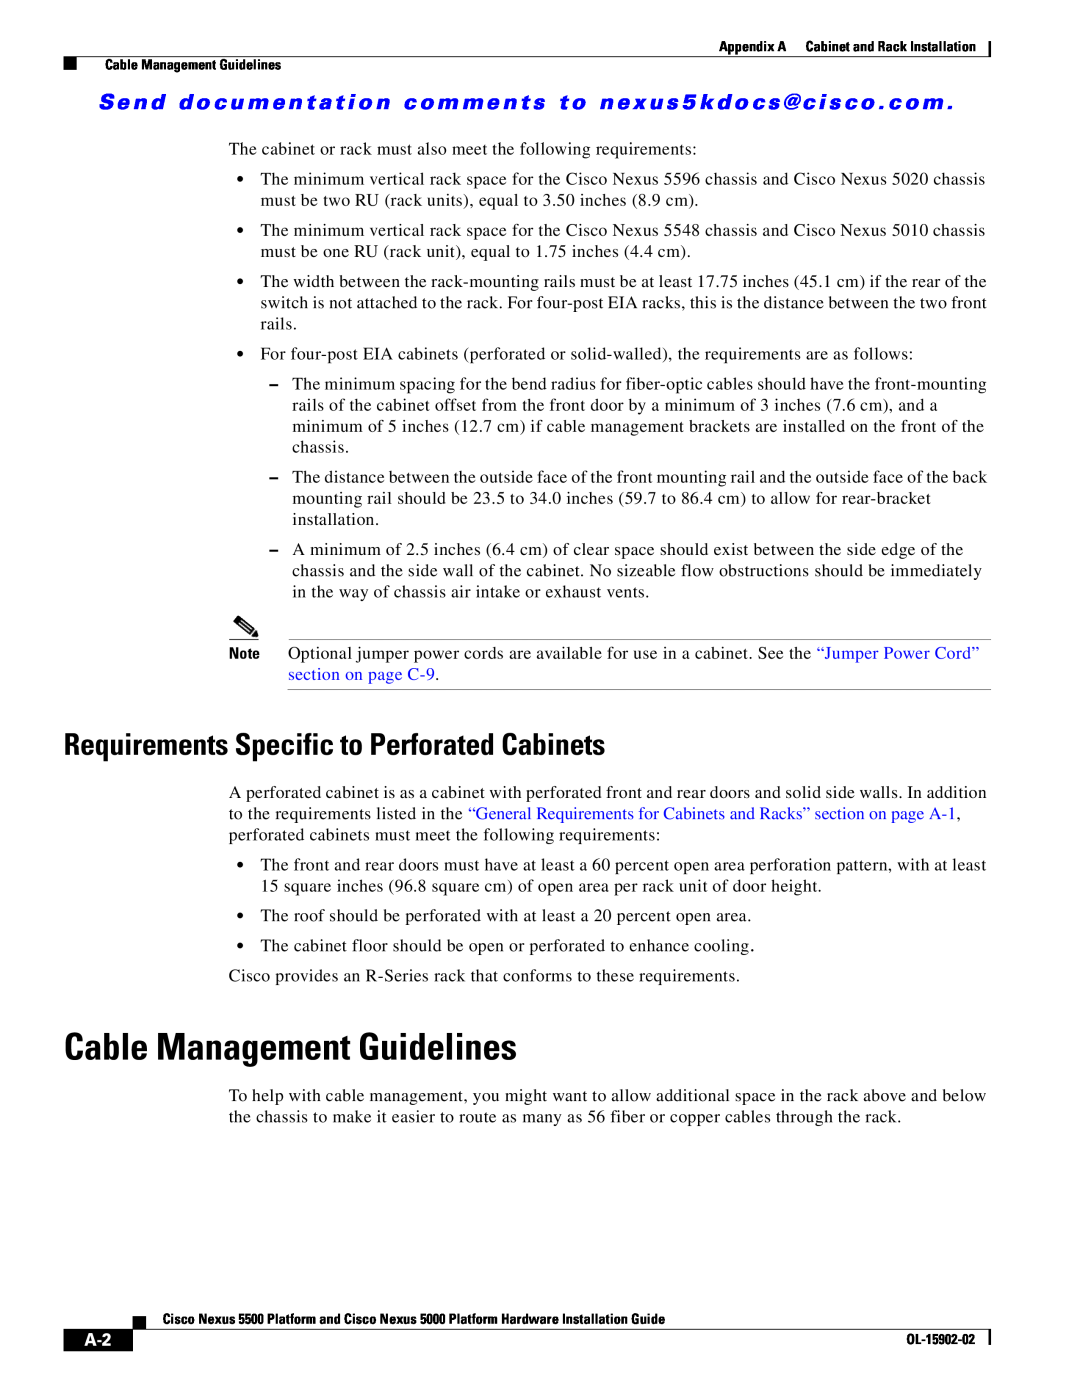 Cisco Systems 5000 manual Cable Management Guidelines, Requirements Specific to Perforated Cabinets 